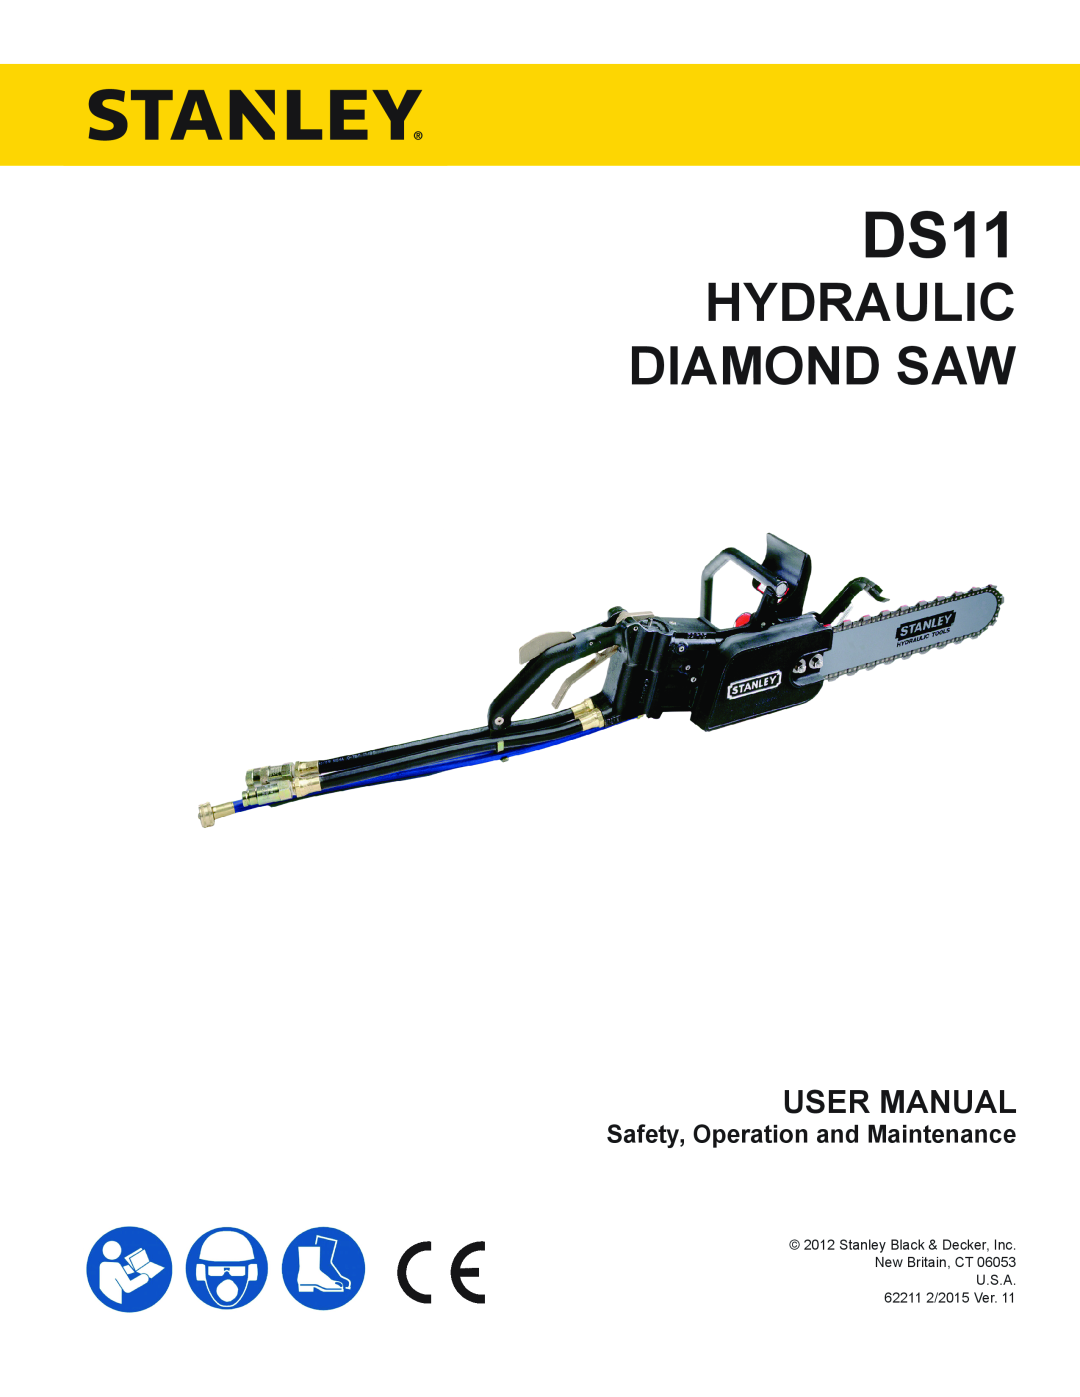 Stanley Black & Decker DS11 user manual Safety, Operation and Maintenance, Hydraulic Diamond Saw 